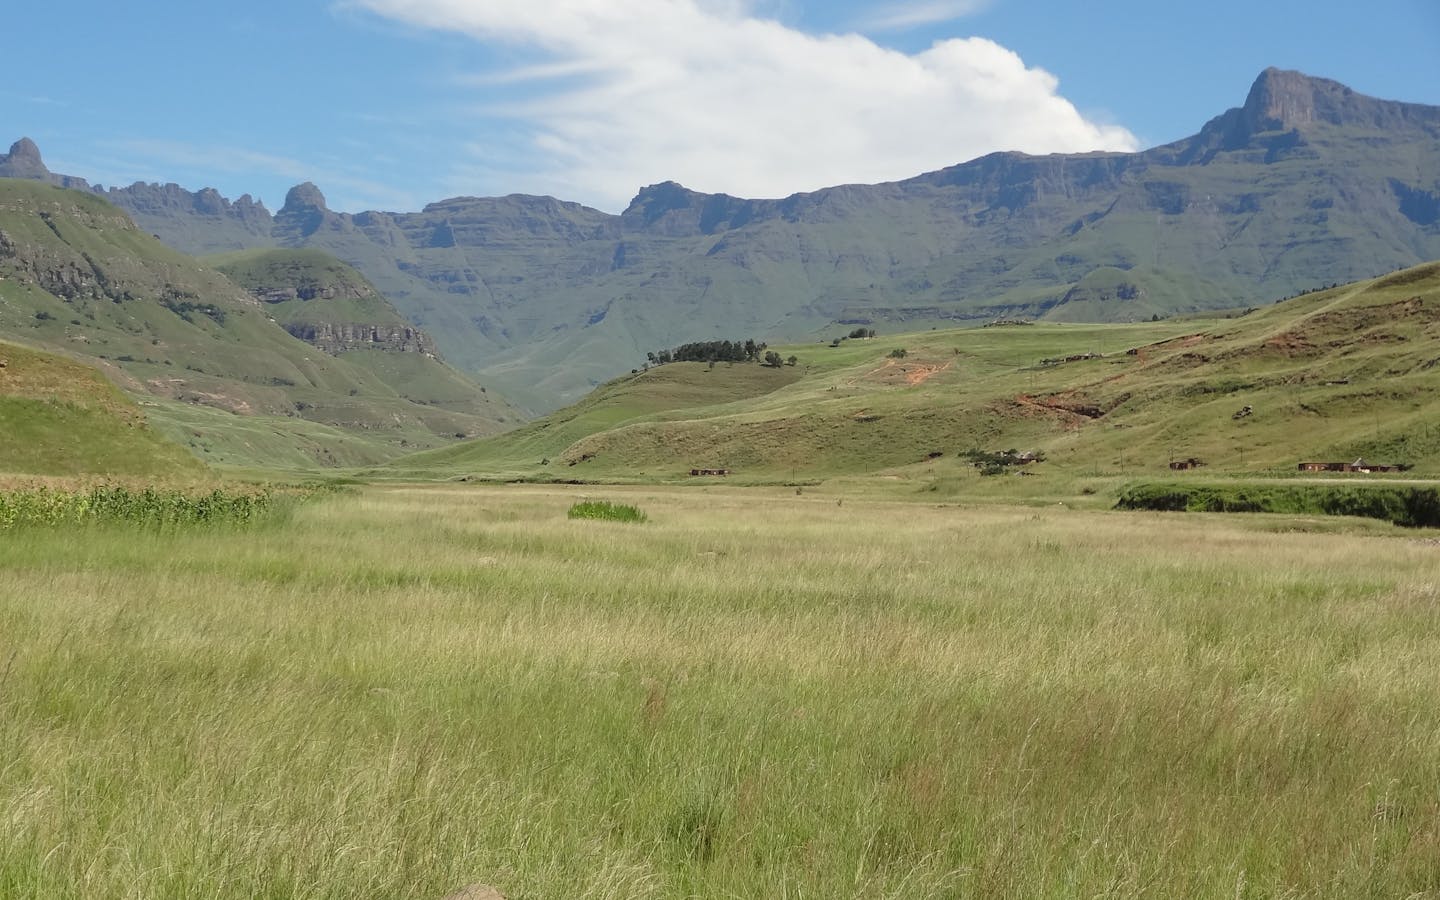 Scenes from KwaZulu-Natal and CEPF-grantee worksites in the Maputaland-Pondoland-Albany hotspot.